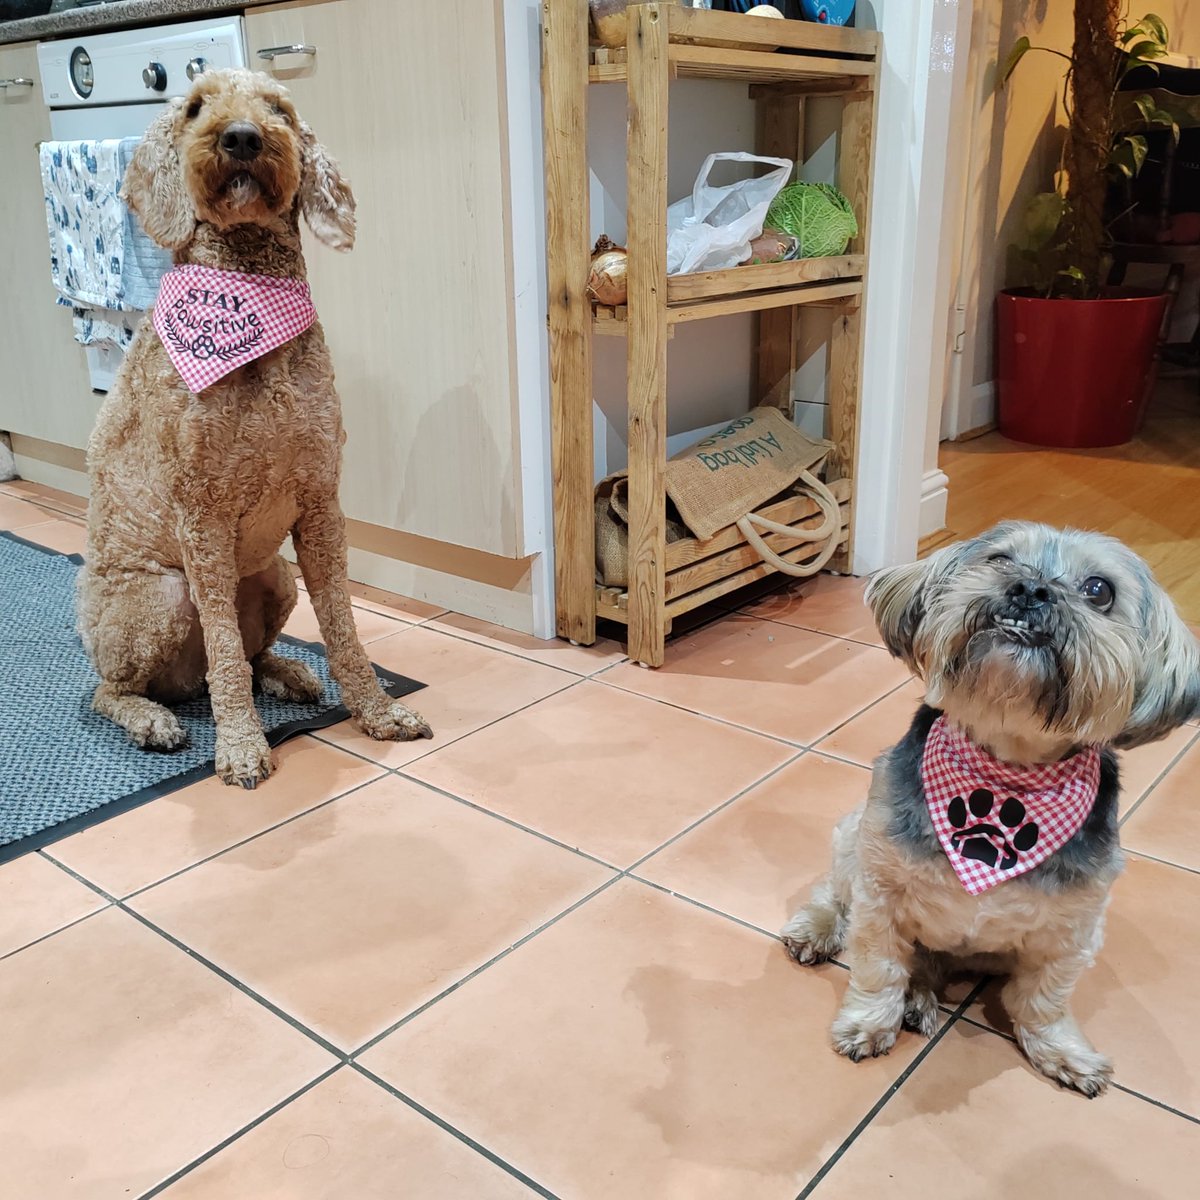 To help with #WinterWellbeing, we've taken up more #craft and have a #Cricut to make exciting things #CharityHour 😁

Like bandanas for the #dogs at #Pawsies
pawsies.uk